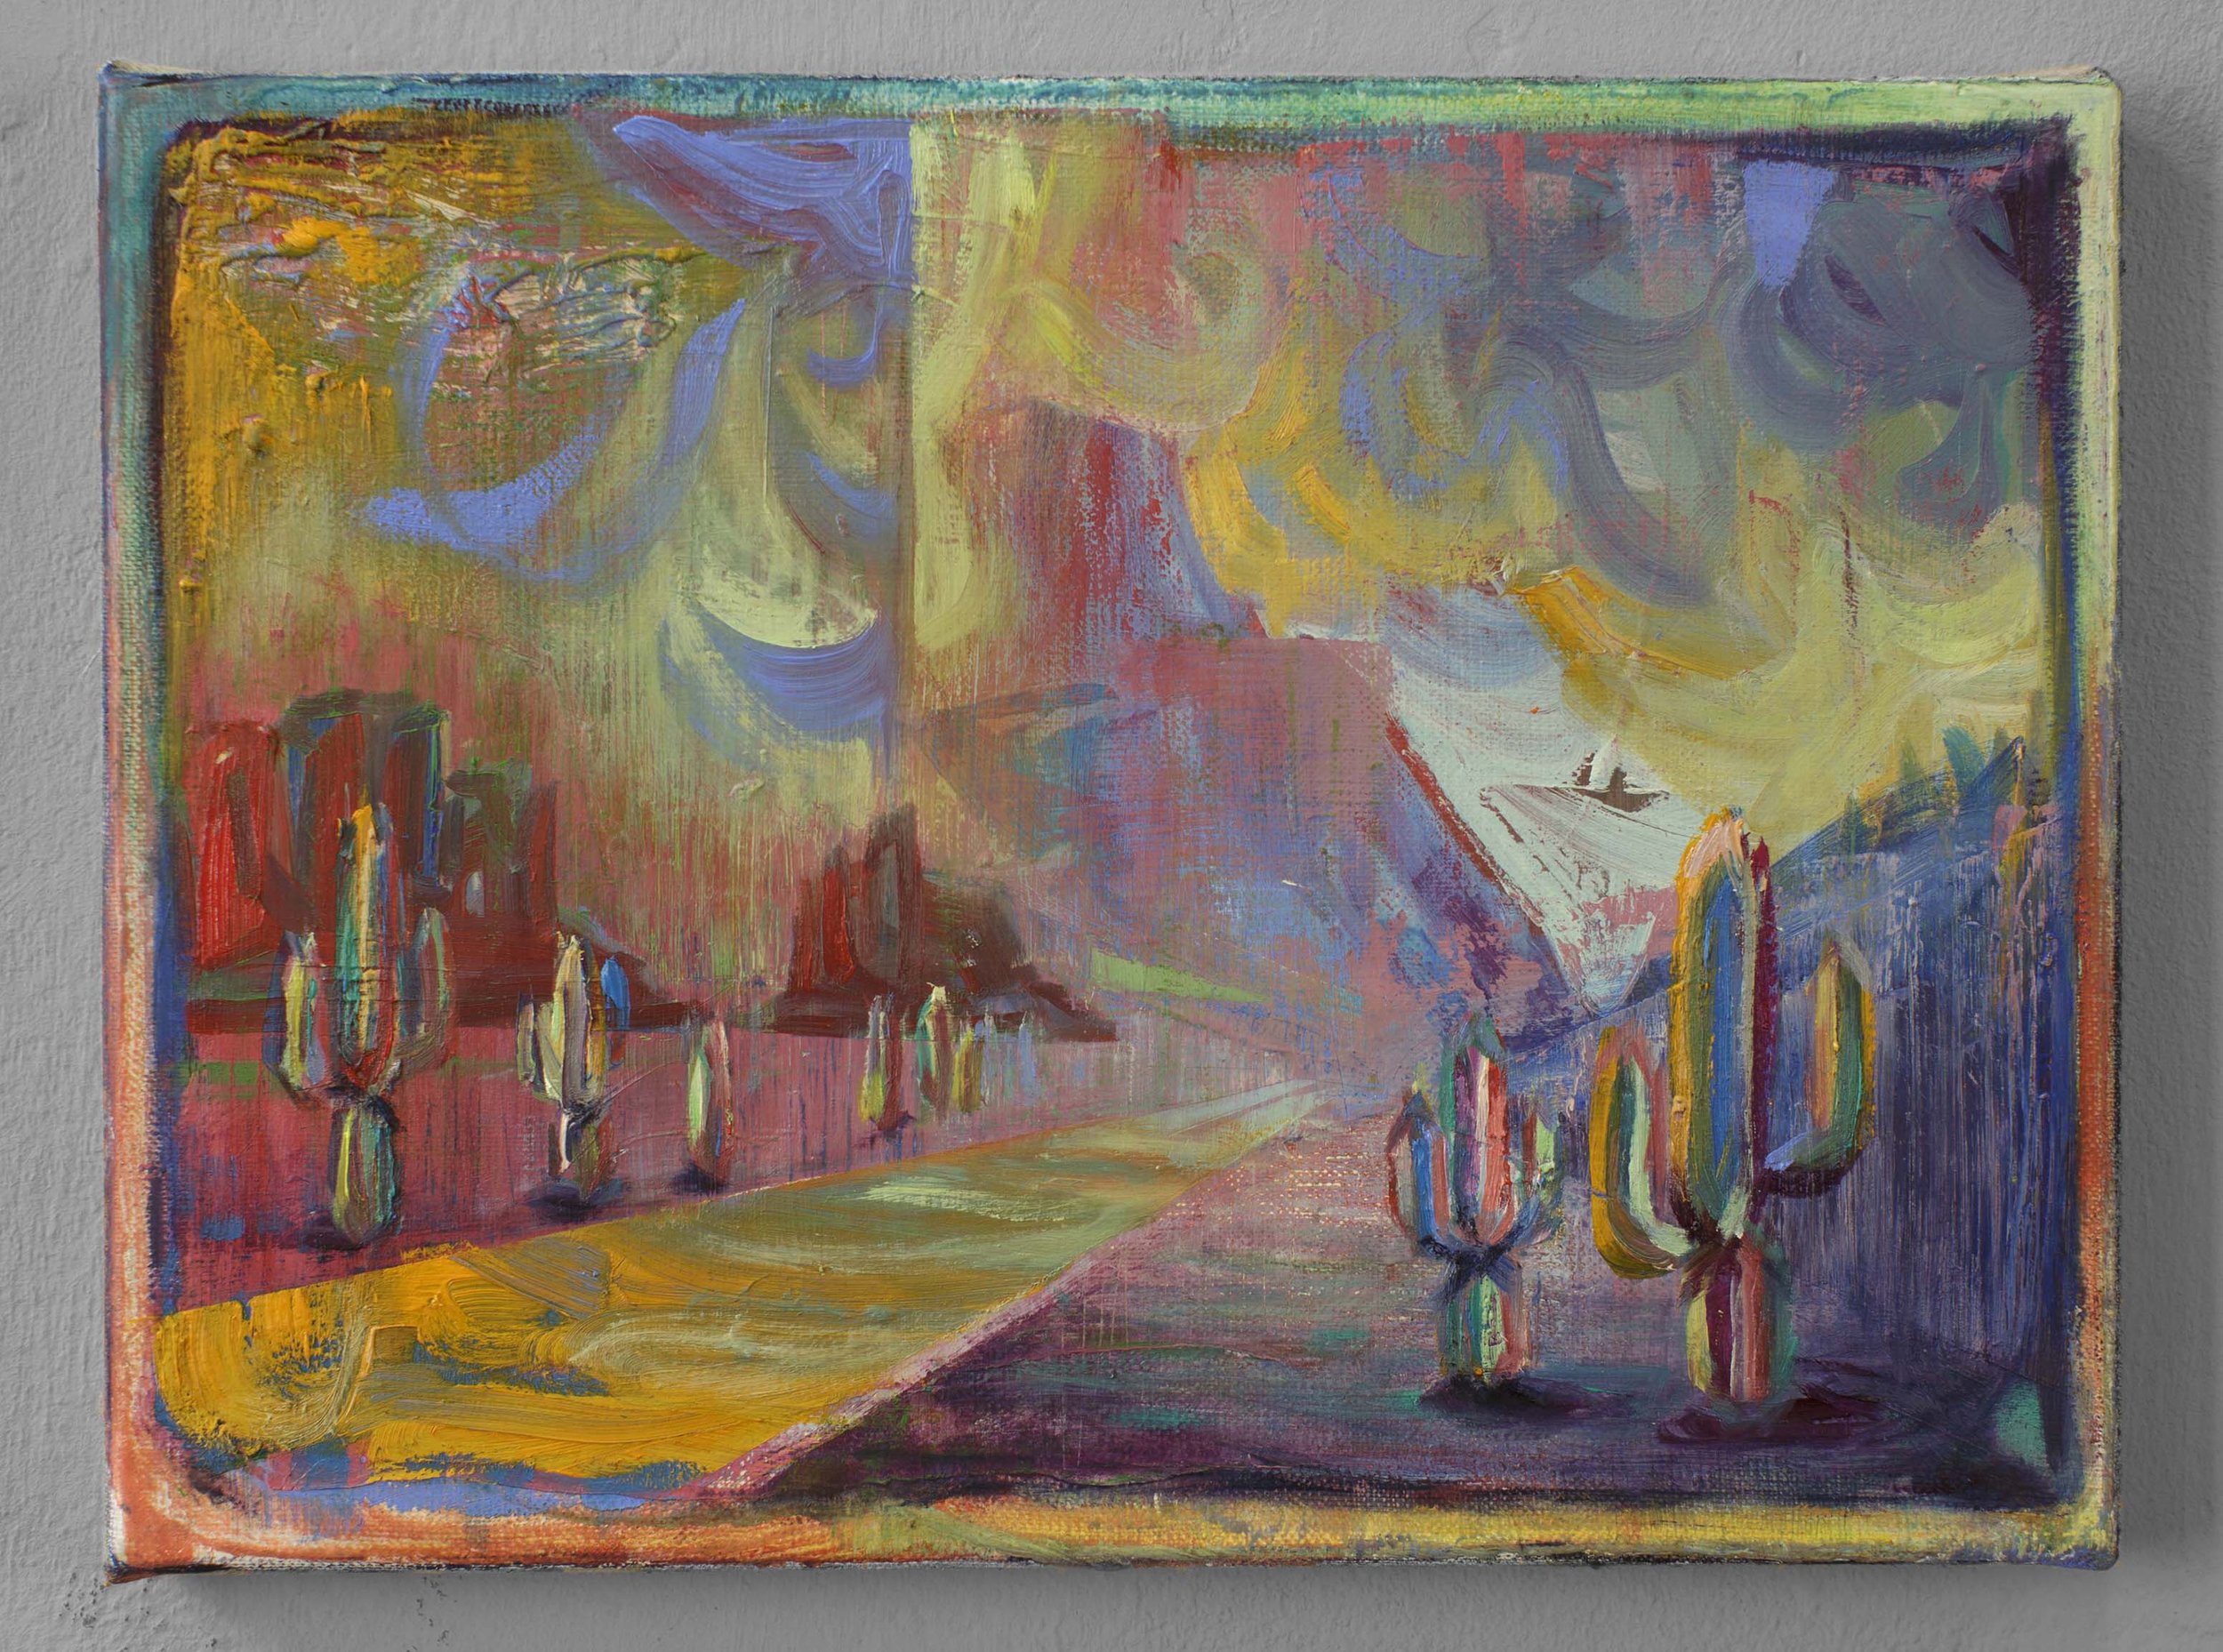   Parkway I  oil on canvas 22 x 30 cm, 2024  